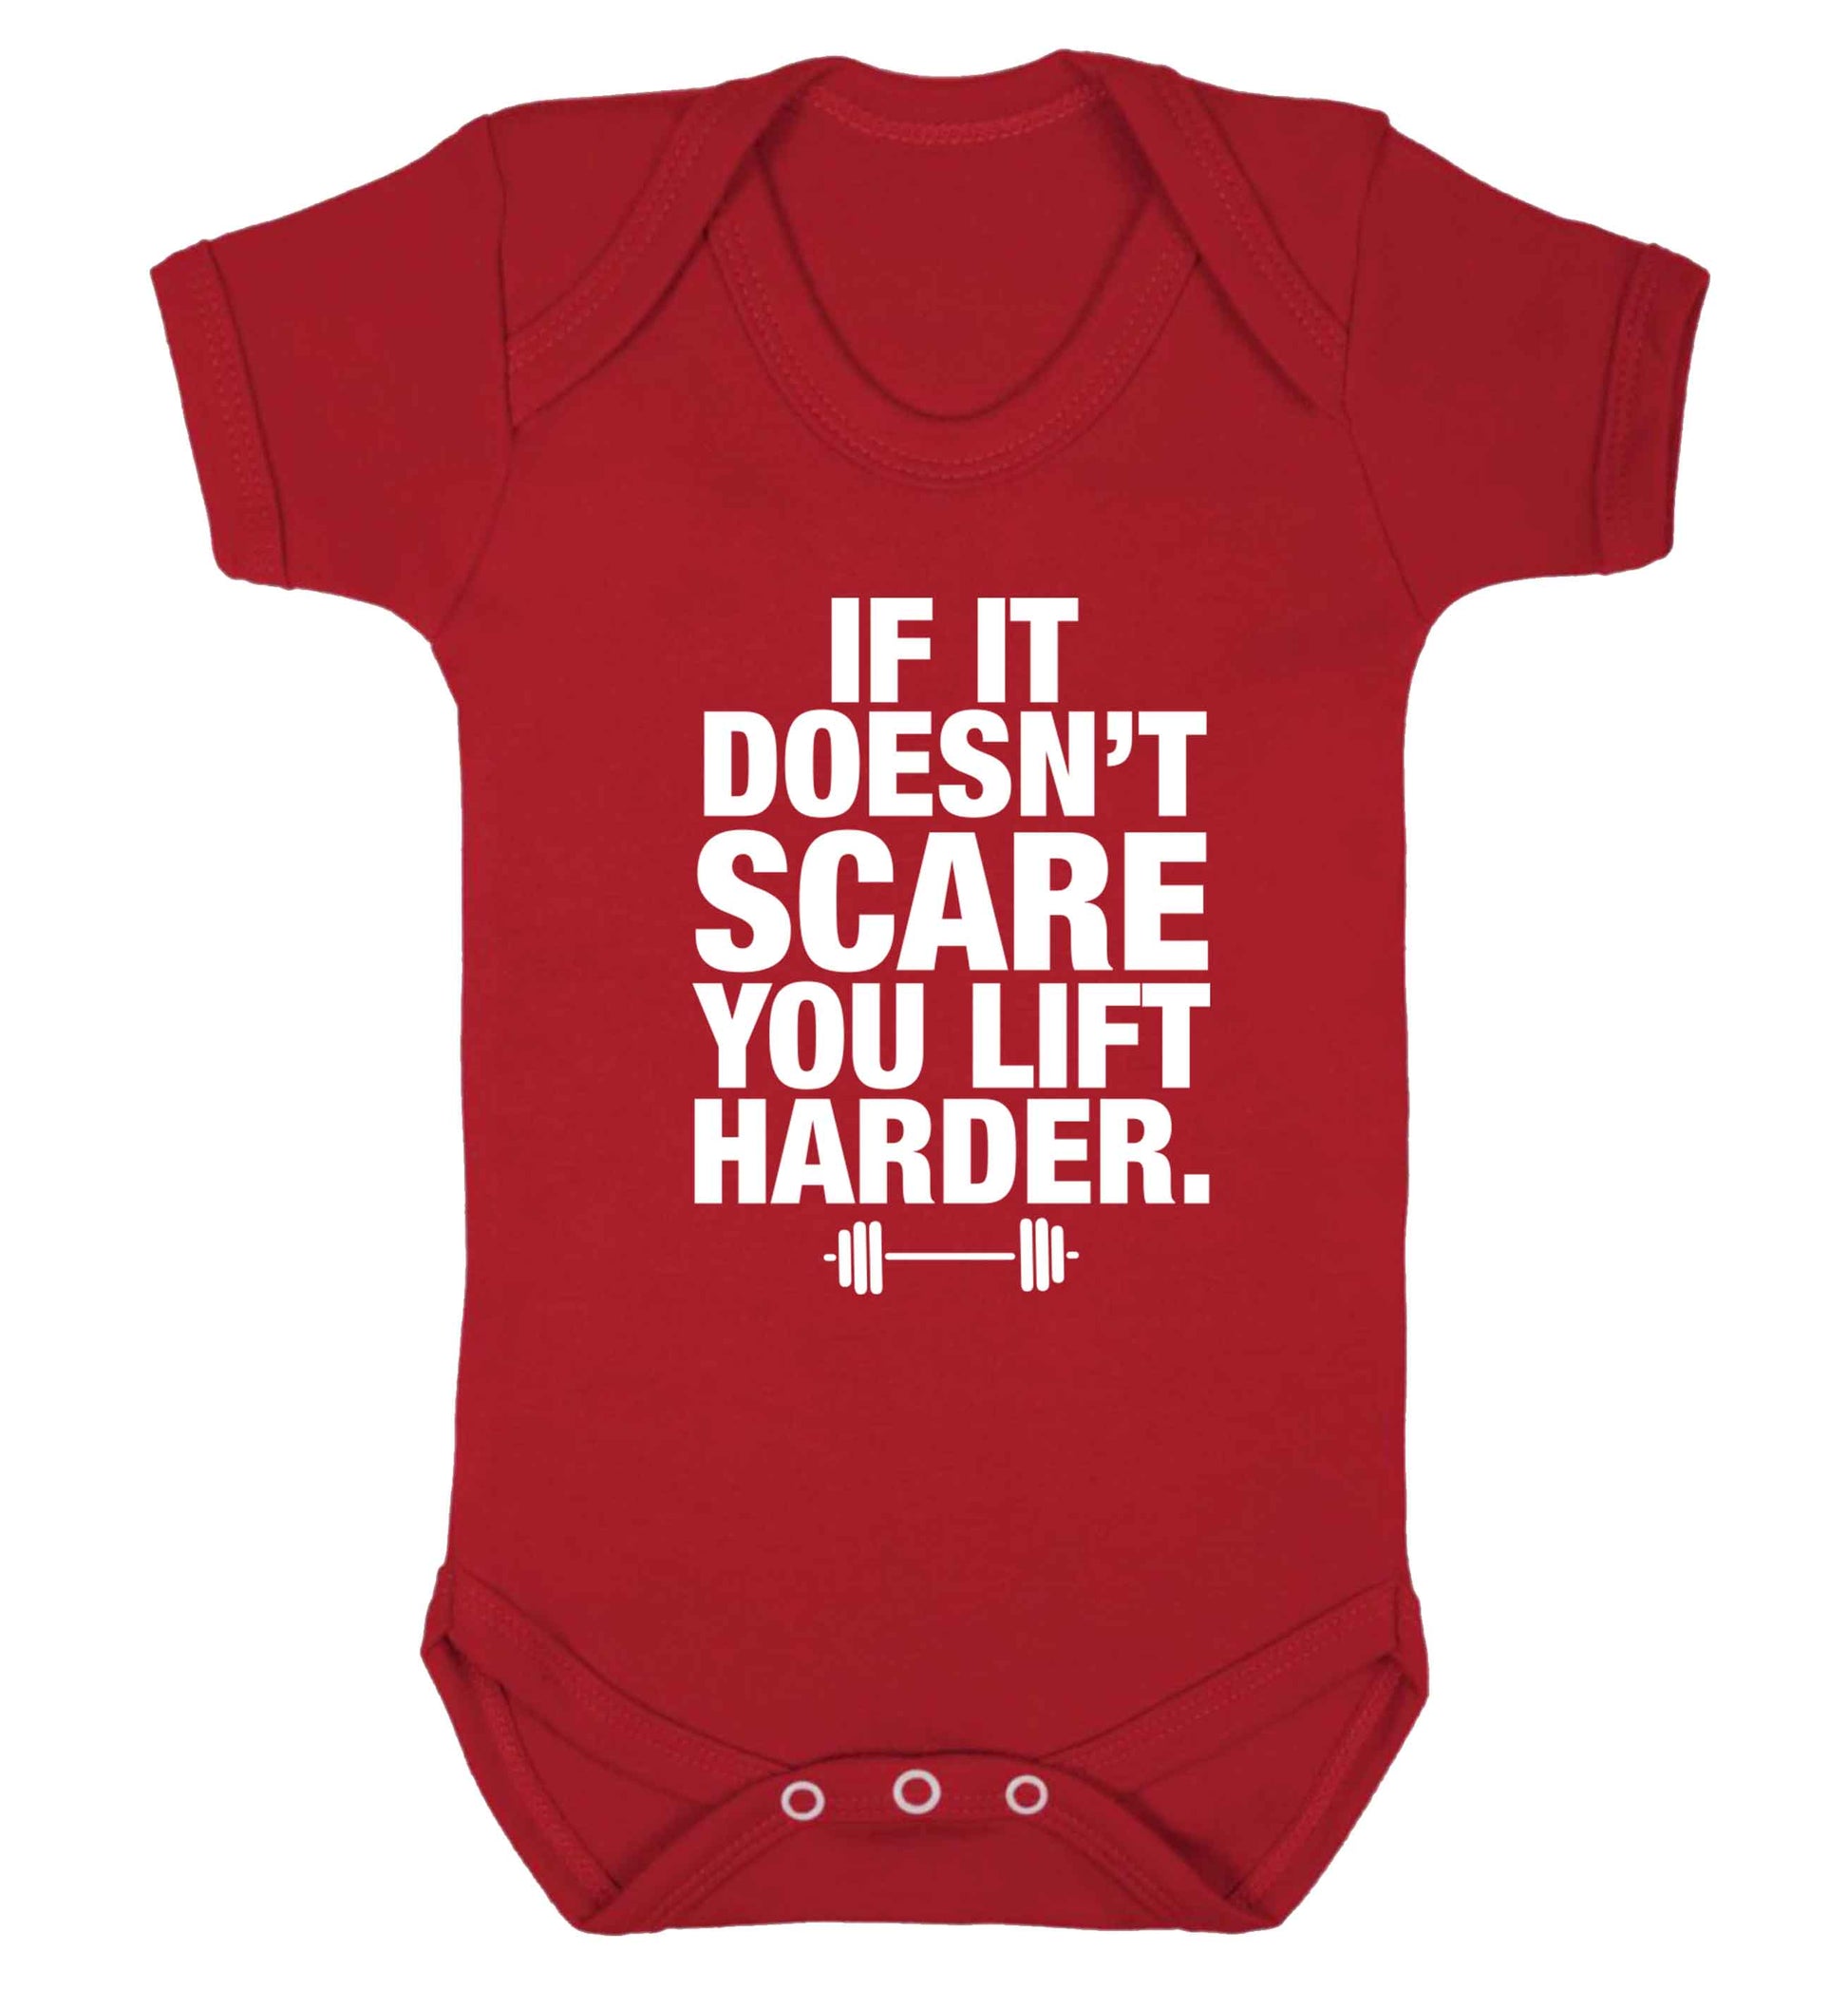 If it doesnt' scare you lift harder Baby Vest red 18-24 months